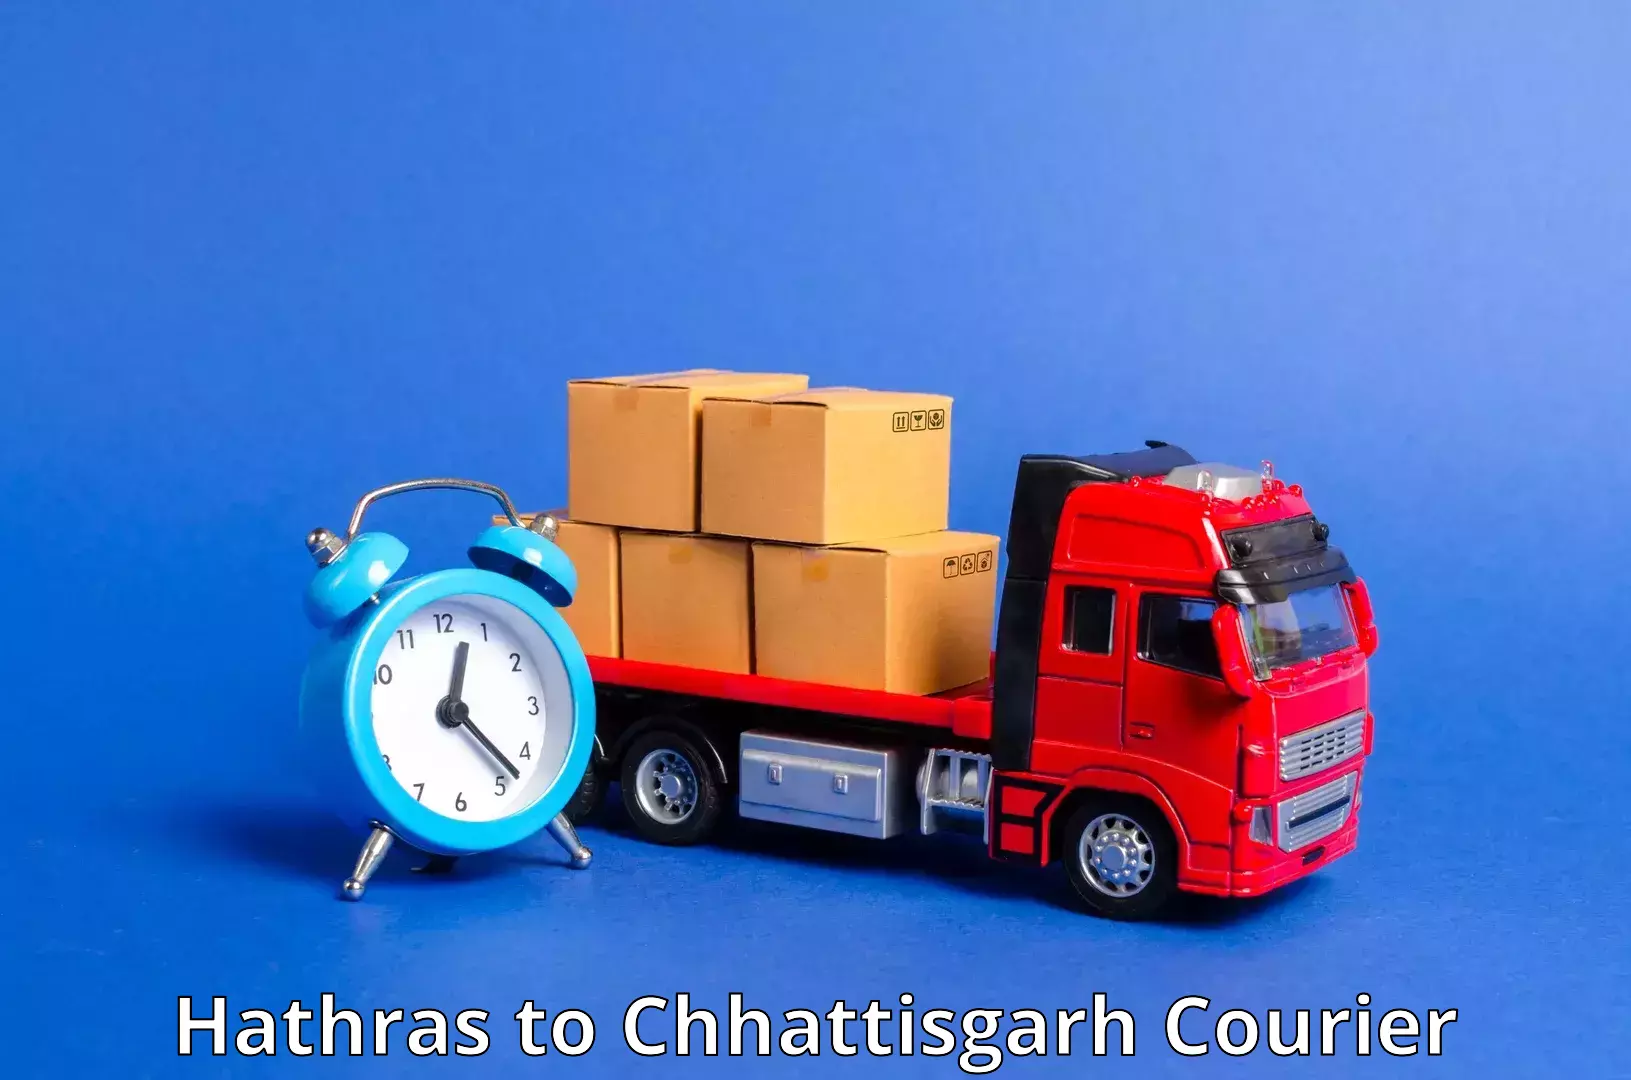 User-friendly delivery service Hathras to Ramanujganj